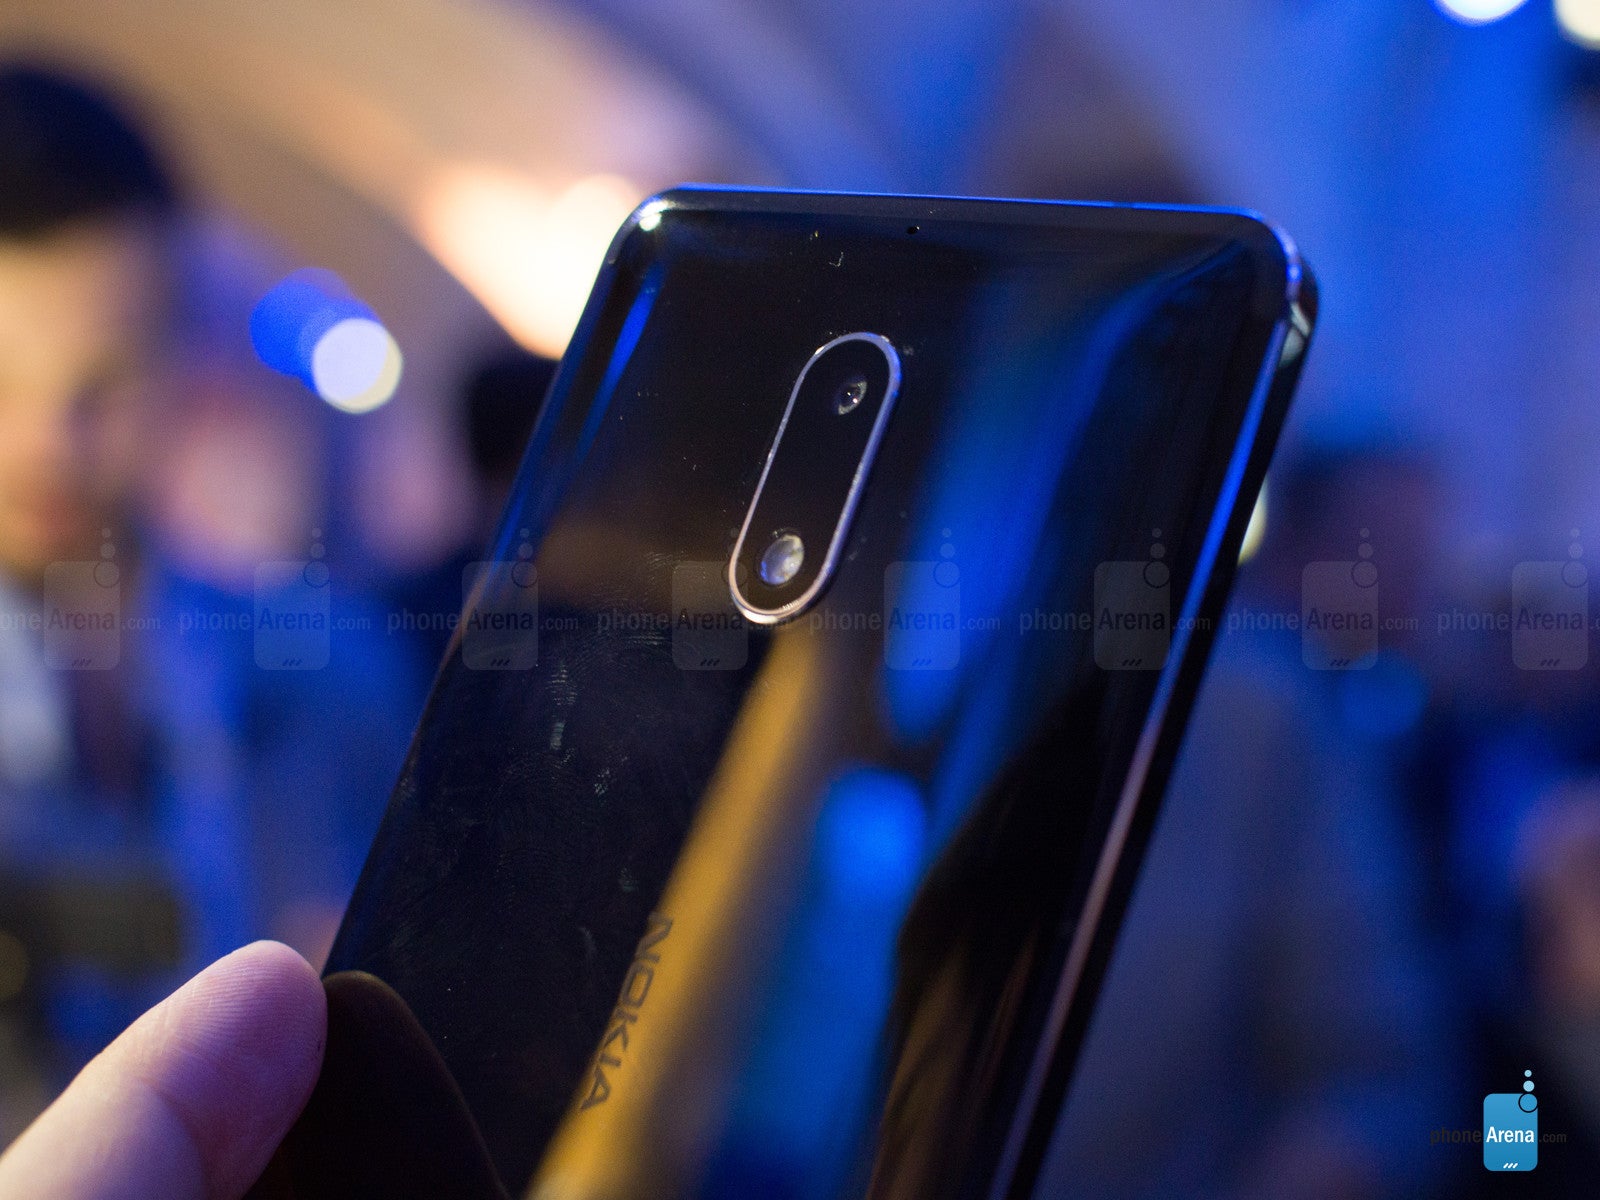 Back in Arte Black! - Nokia 6 hands-on: it's not here just to tickle your nostalgia